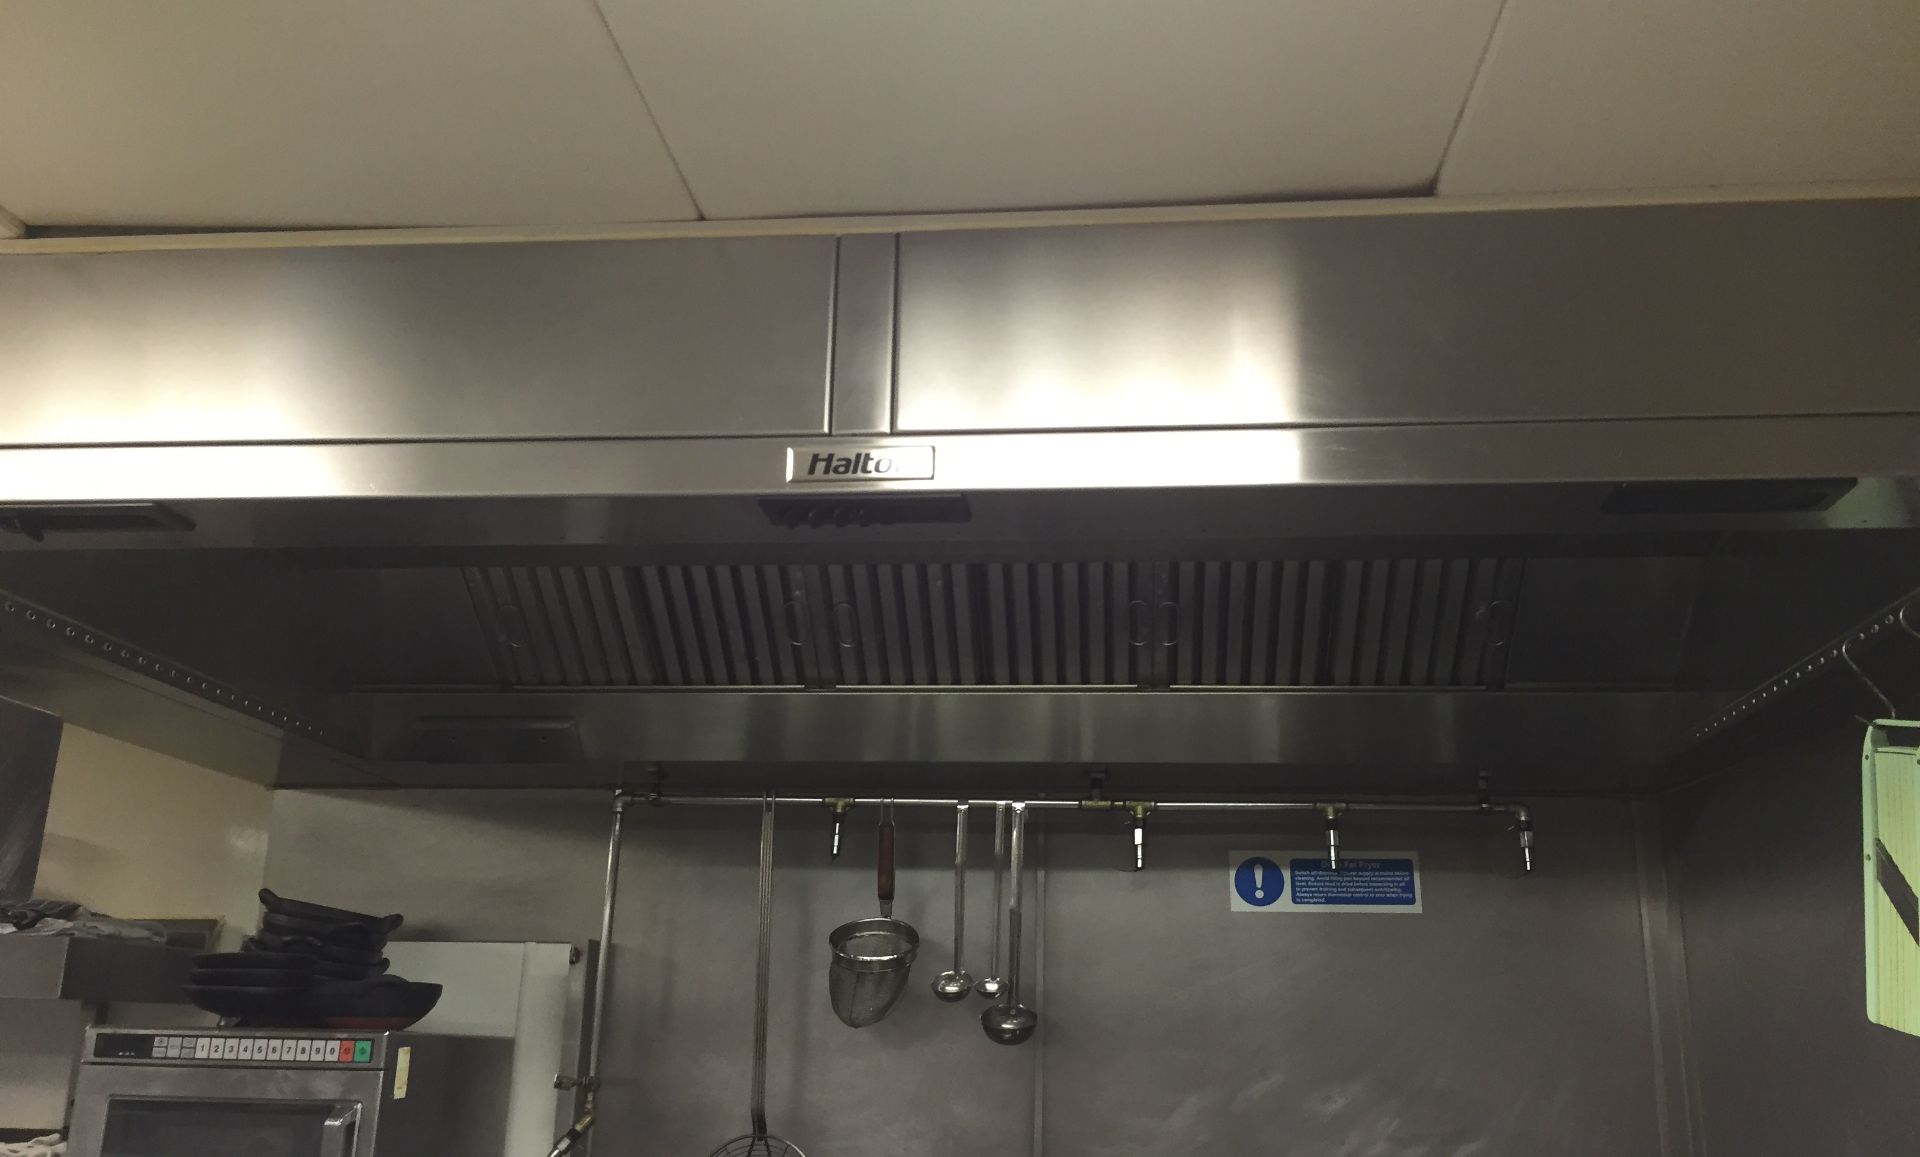 1 x Halton Stainless Steel Commercial Extractor Hood With Filters - Dimensions: 1248cm x 148cm x